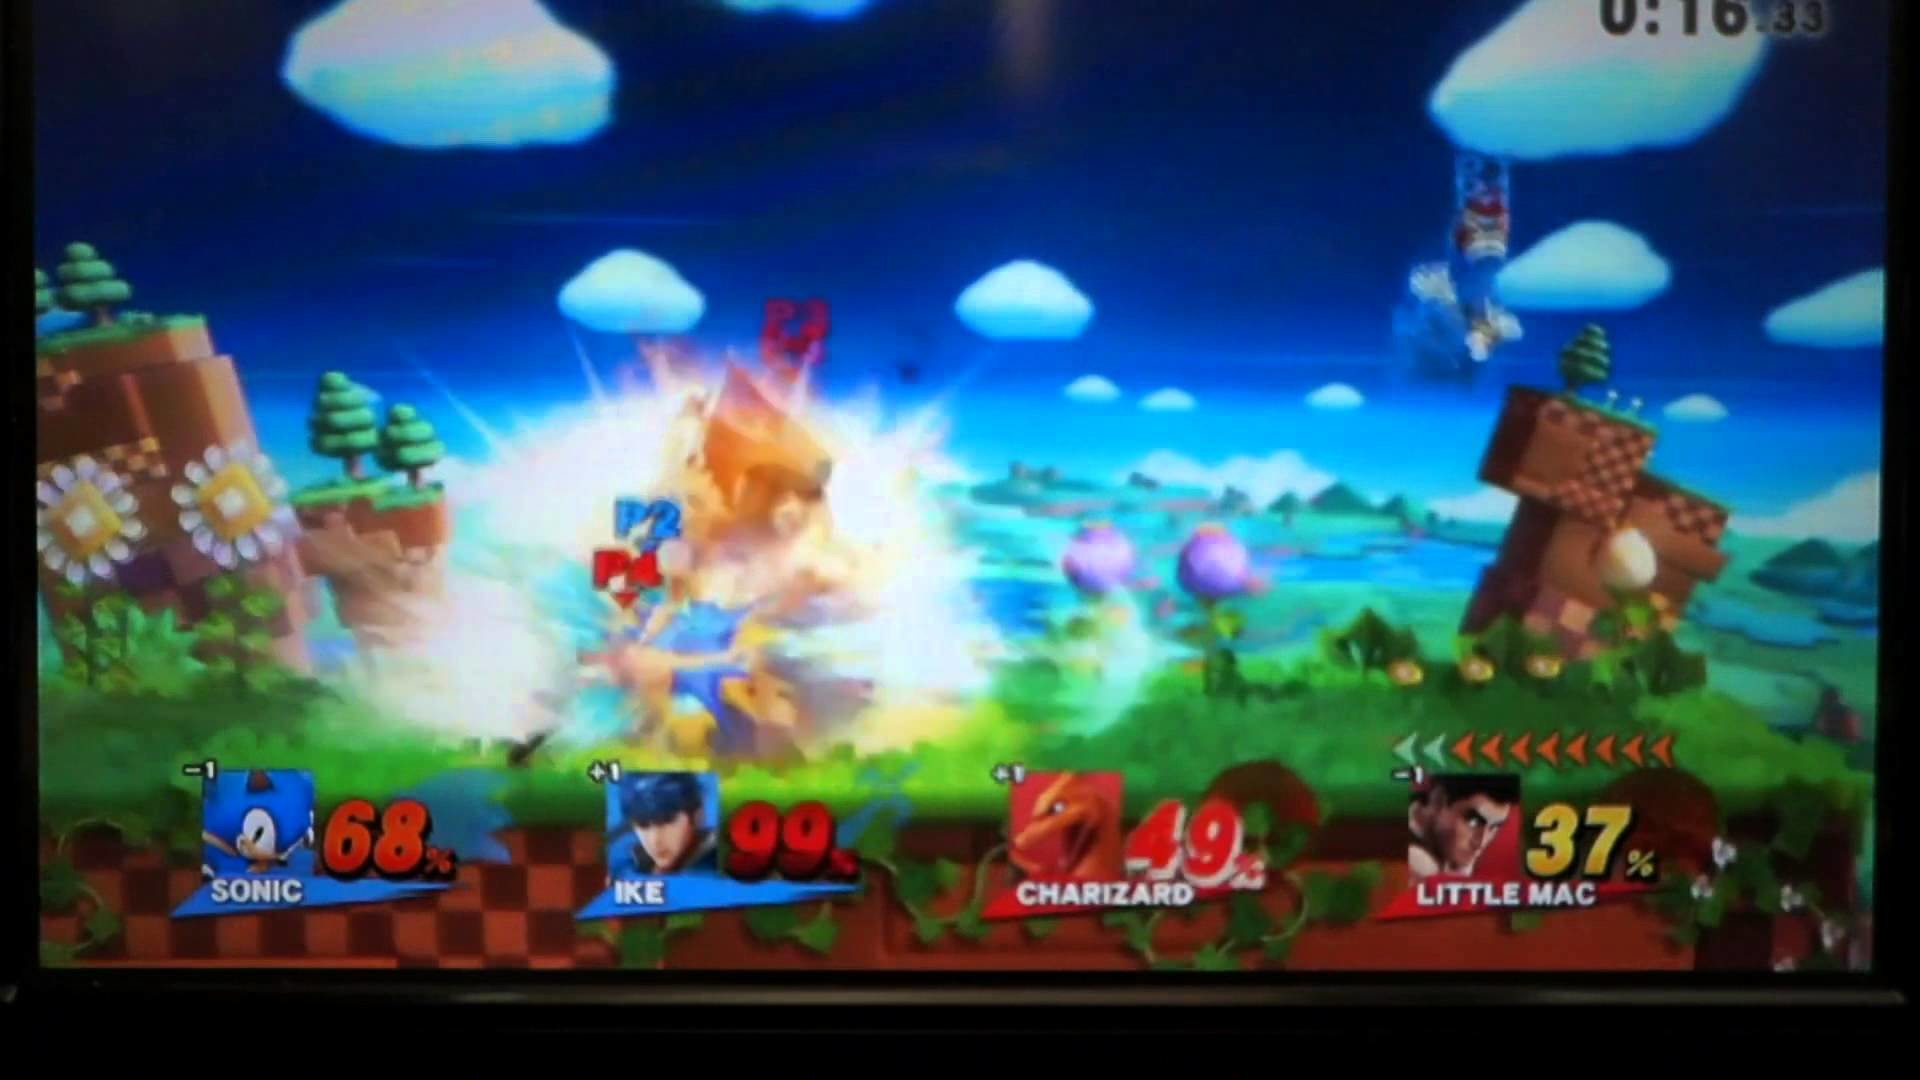 1920x1080 (Wii U) Replay: Sonic and Link vs. Charizard and Little Mac